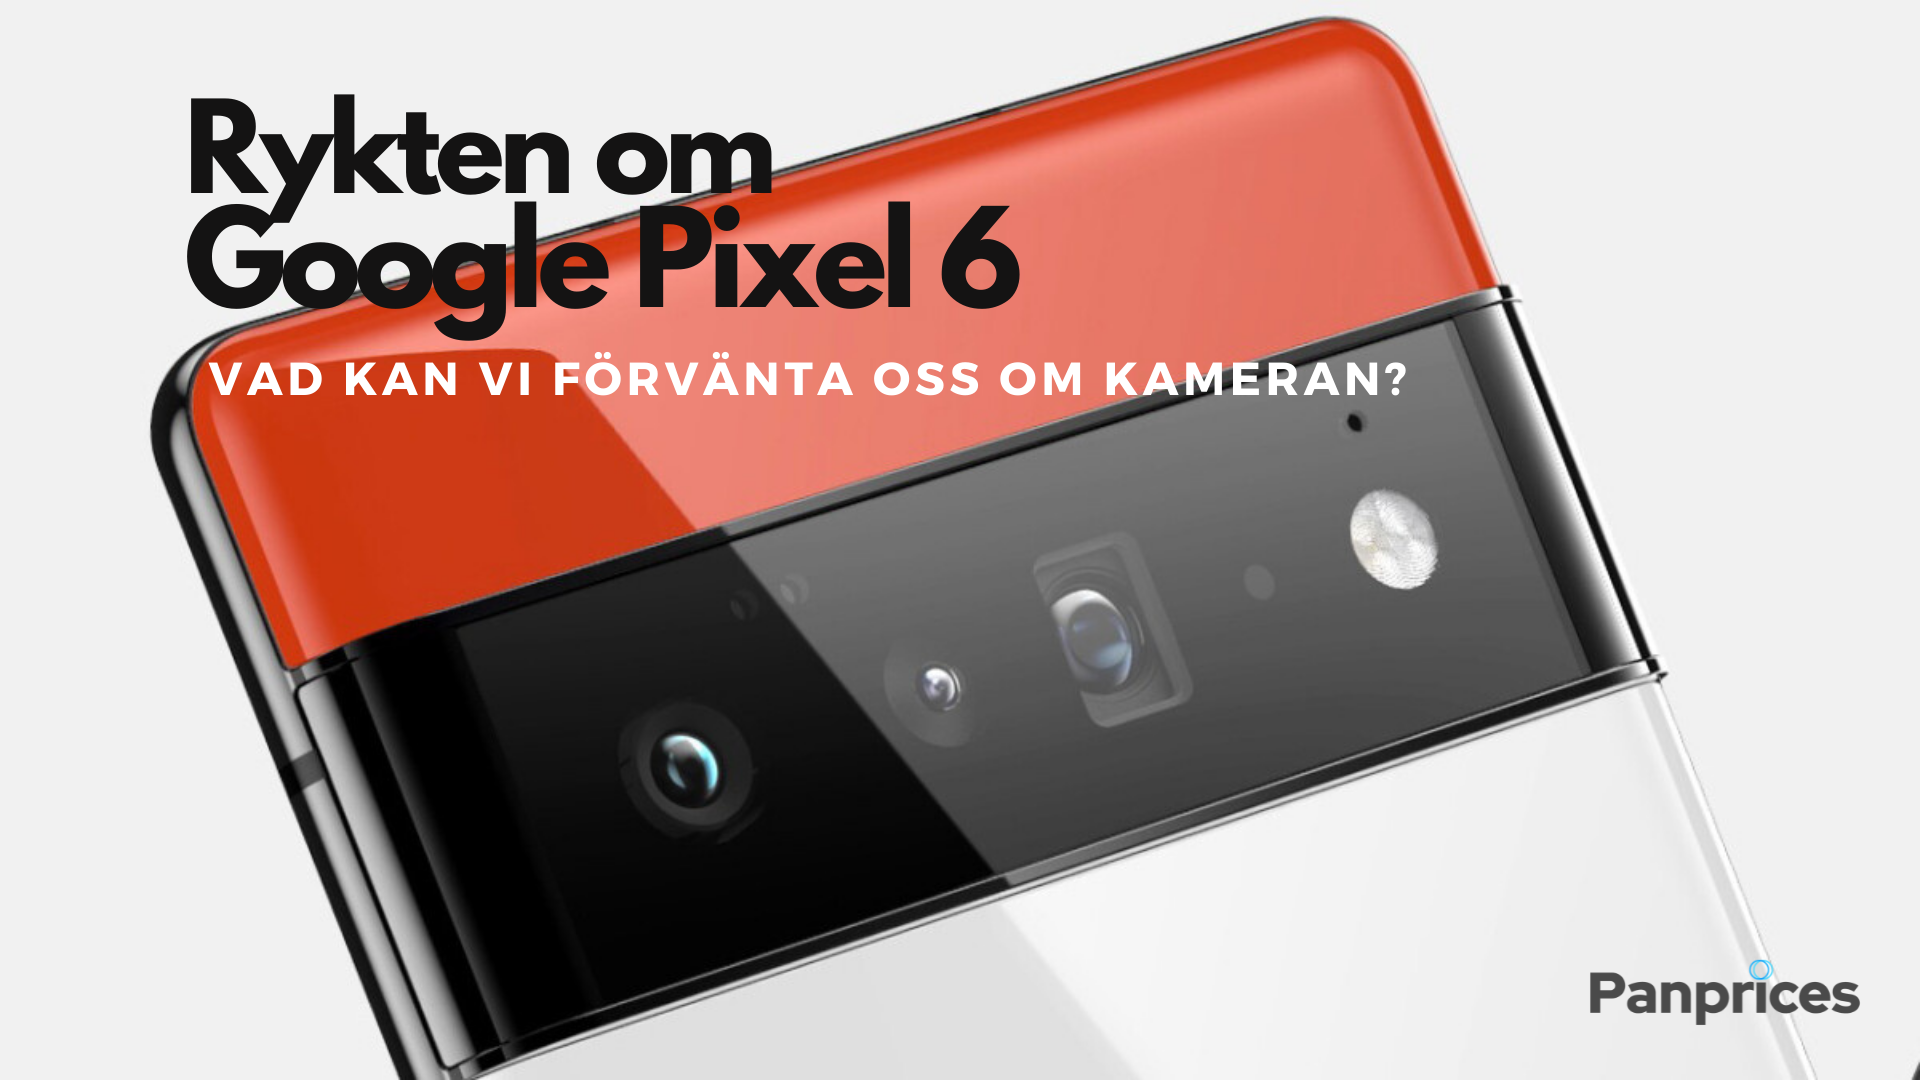 Google Pixel 6 Rumors: What we can expect about its camera?